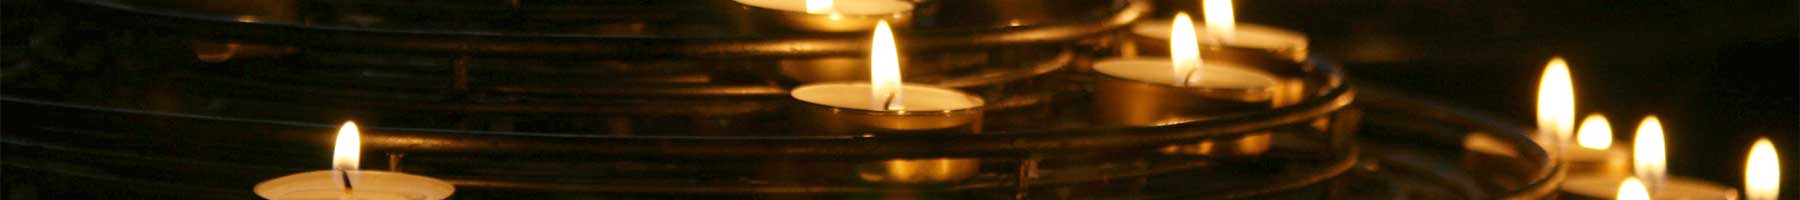 small votive candles on a tiered metal stand